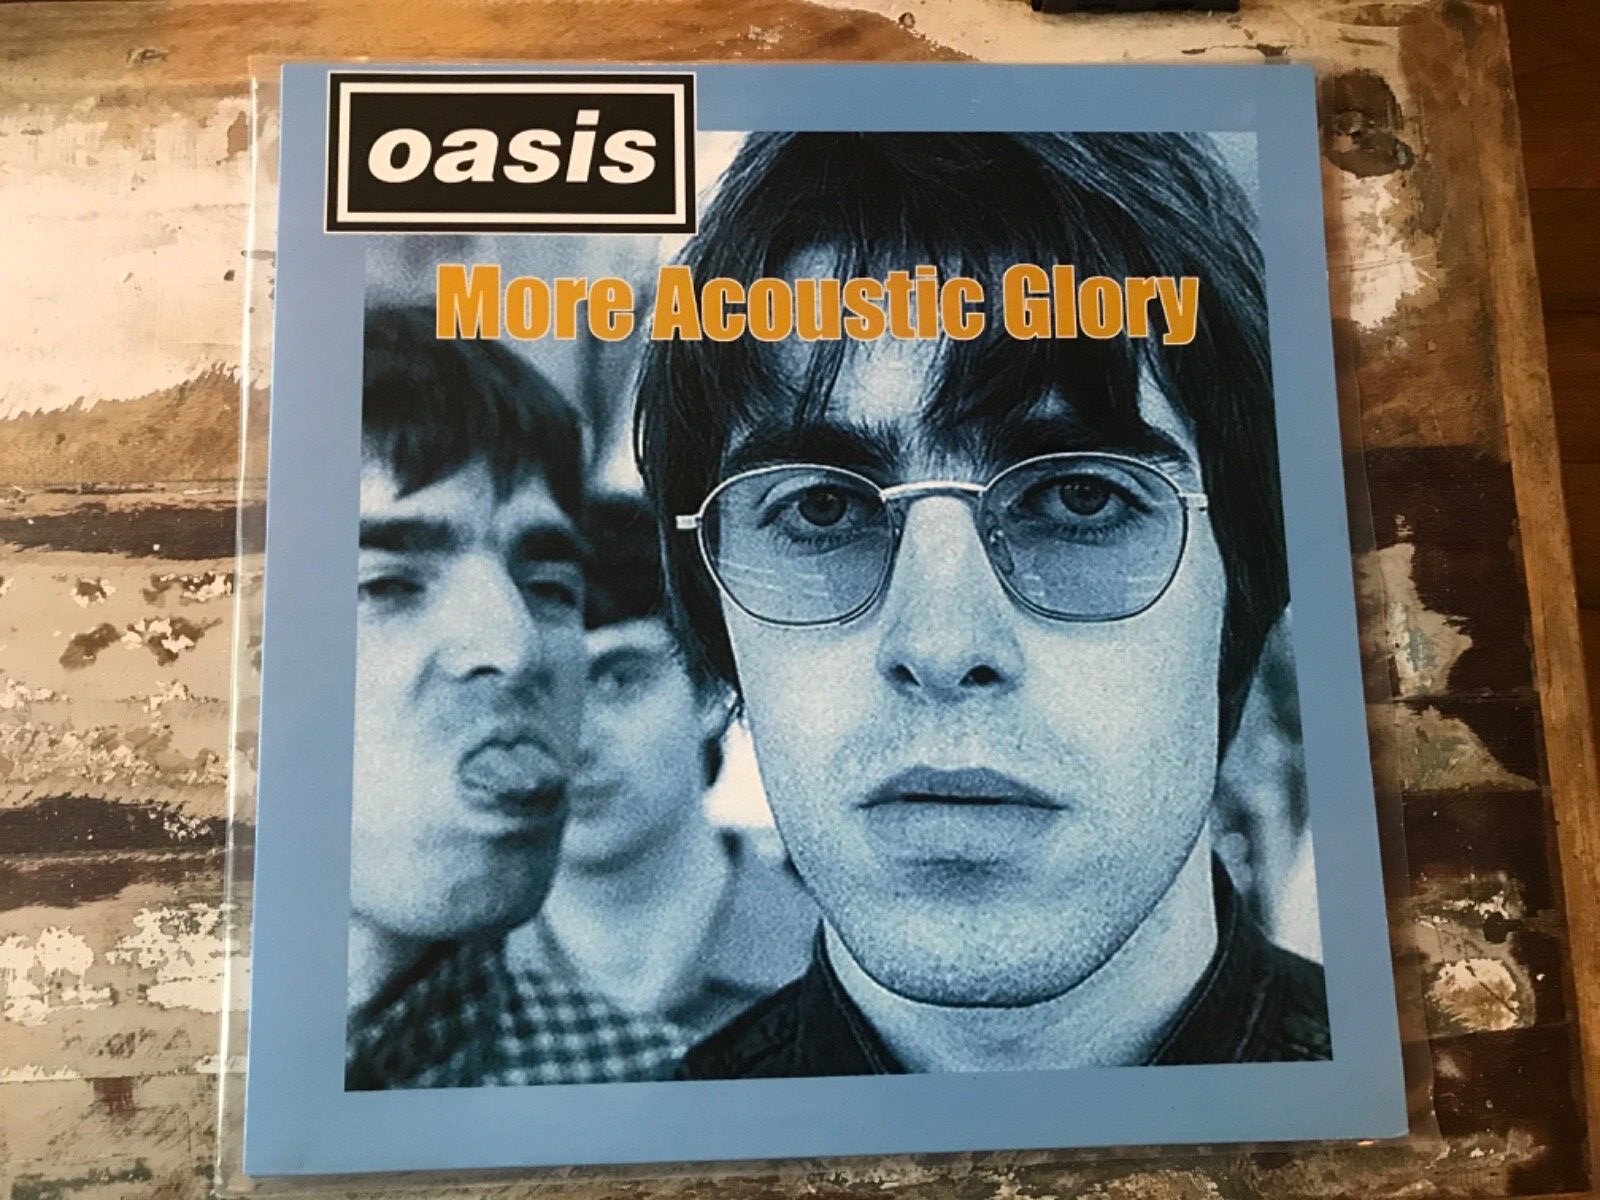 Oasis 12” Vinyl Record - More Acoustic Glory